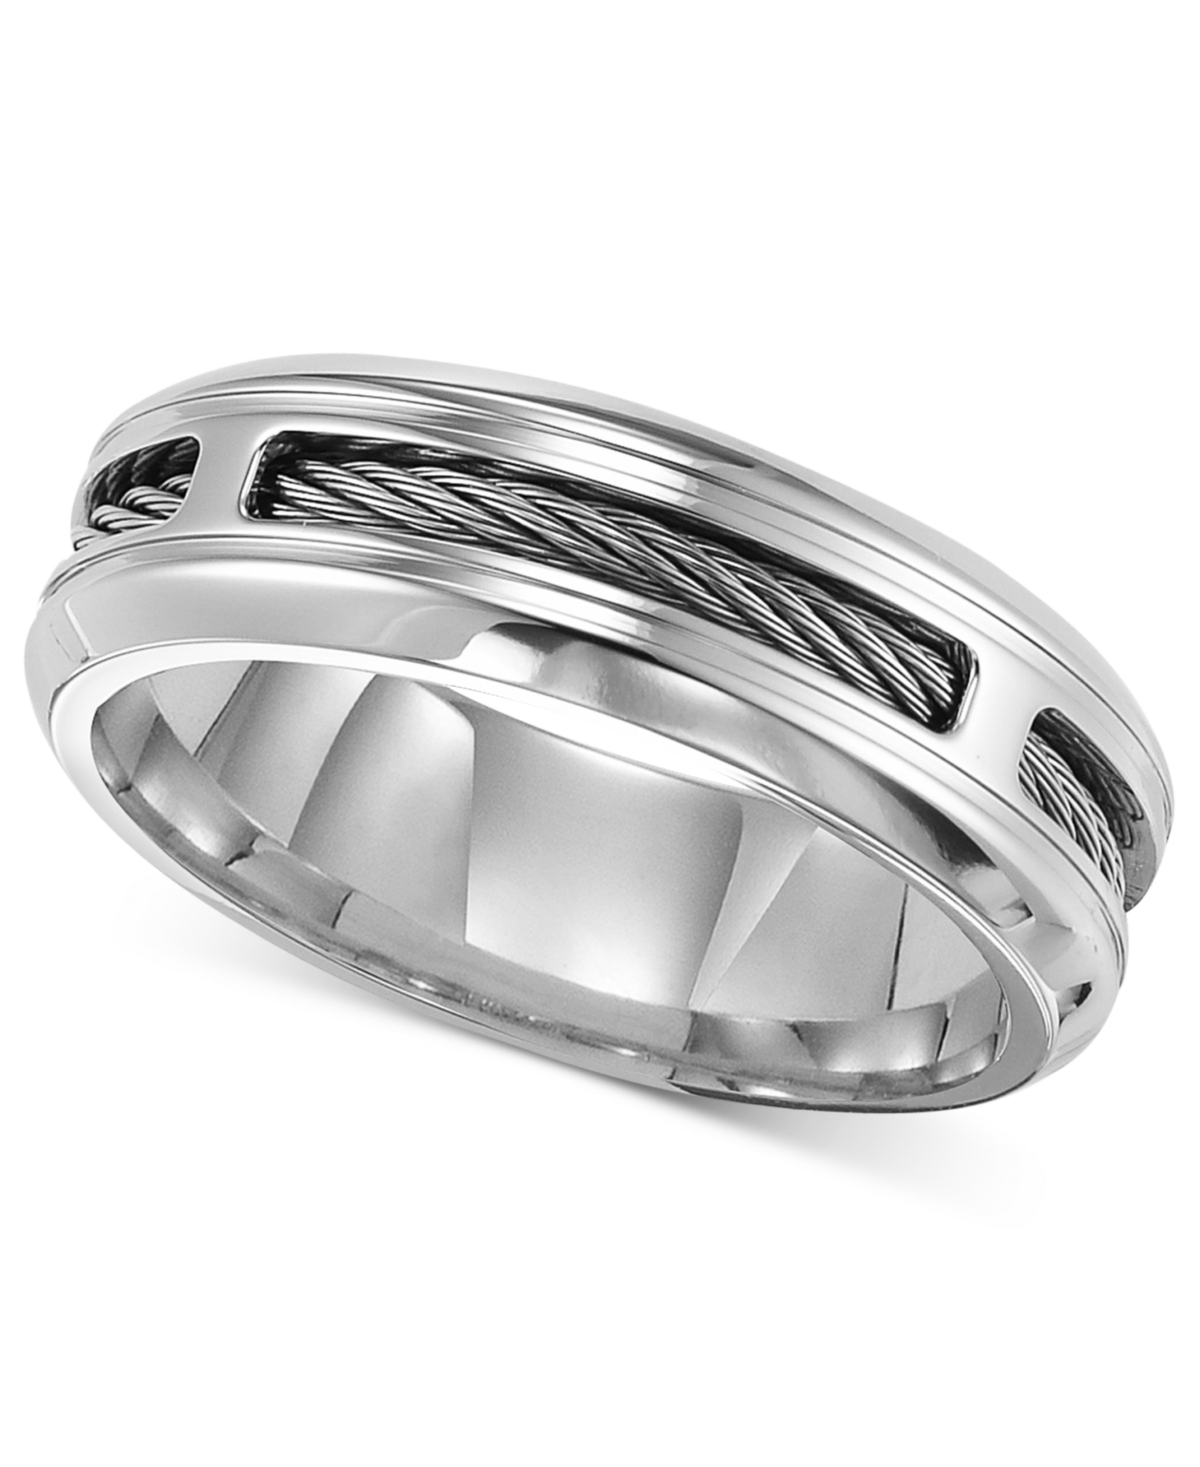 Men's Stainless Steel Ring, Comfort Fit Cable Wedding Band - Steel